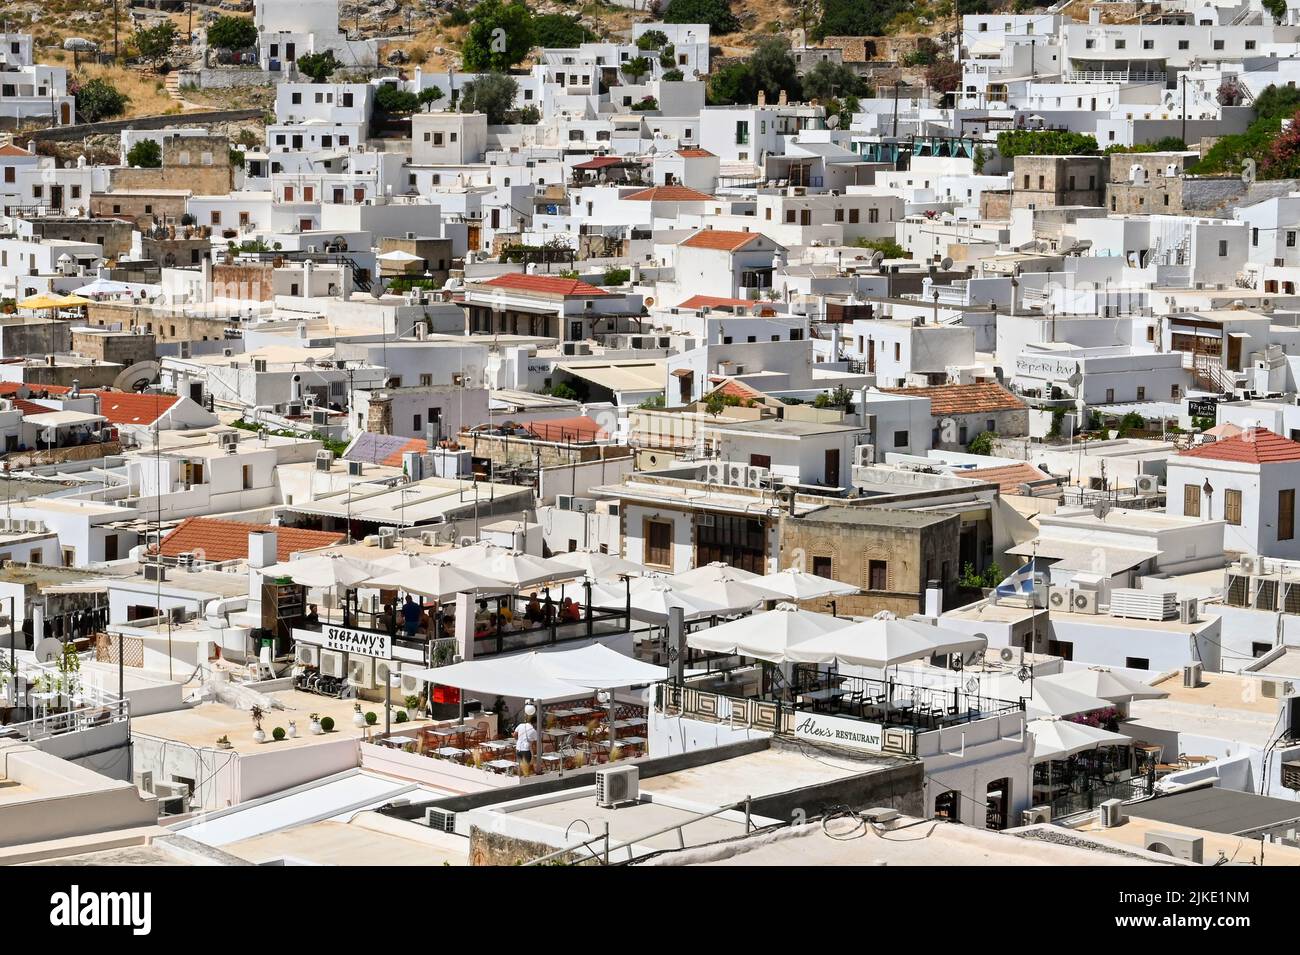 Lindos, Rodes, Greece - May 2022: Aerial view of restaurants and other whitewashed buildings in the town of Lindos Stock Photo